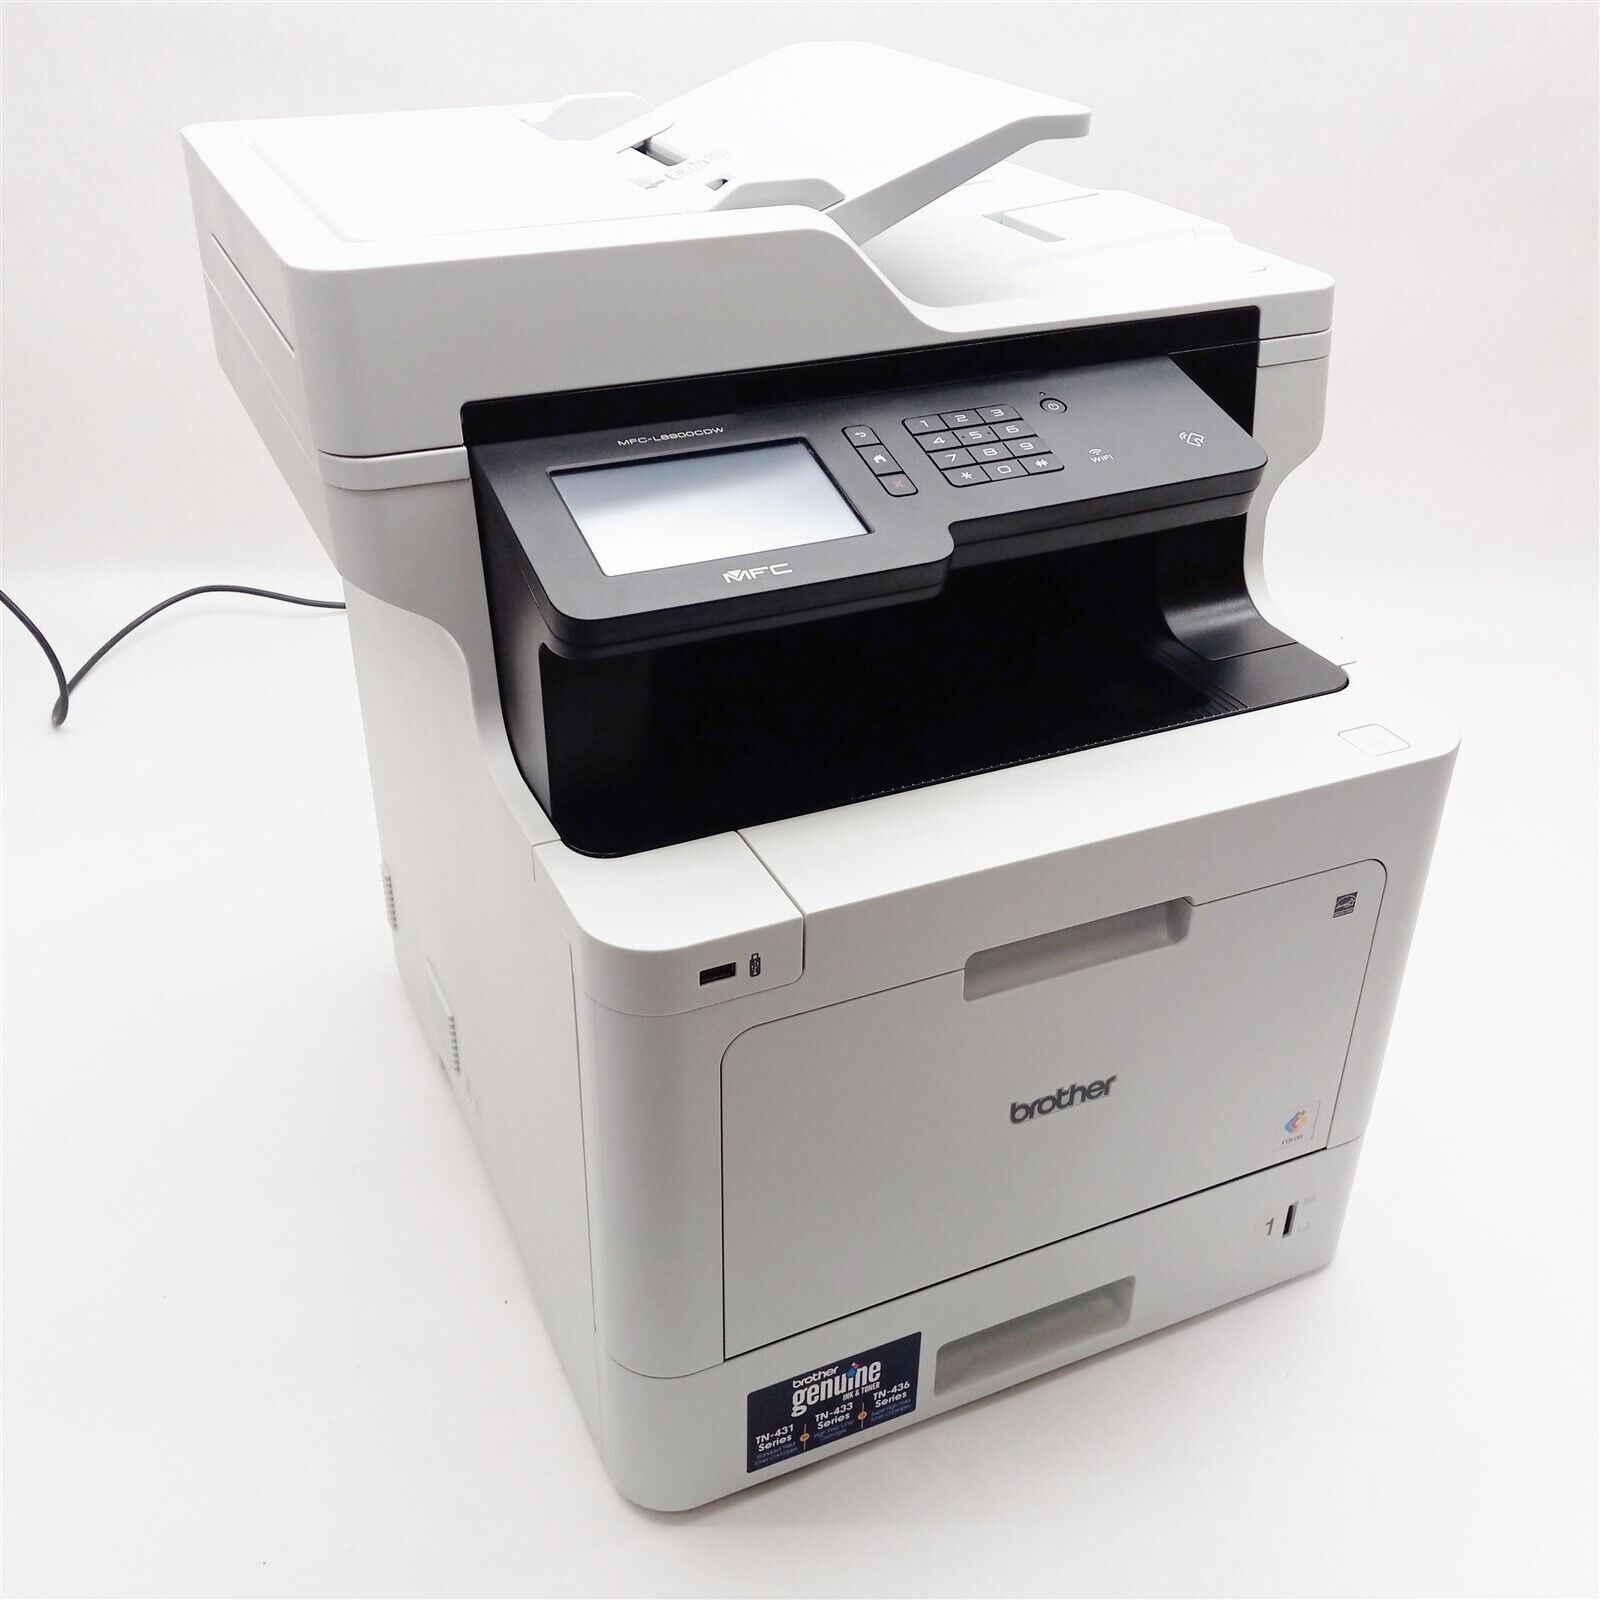 Brother MFC-L8900CDW Business Color Laser All-In-One Duplex Printer Fax Scan